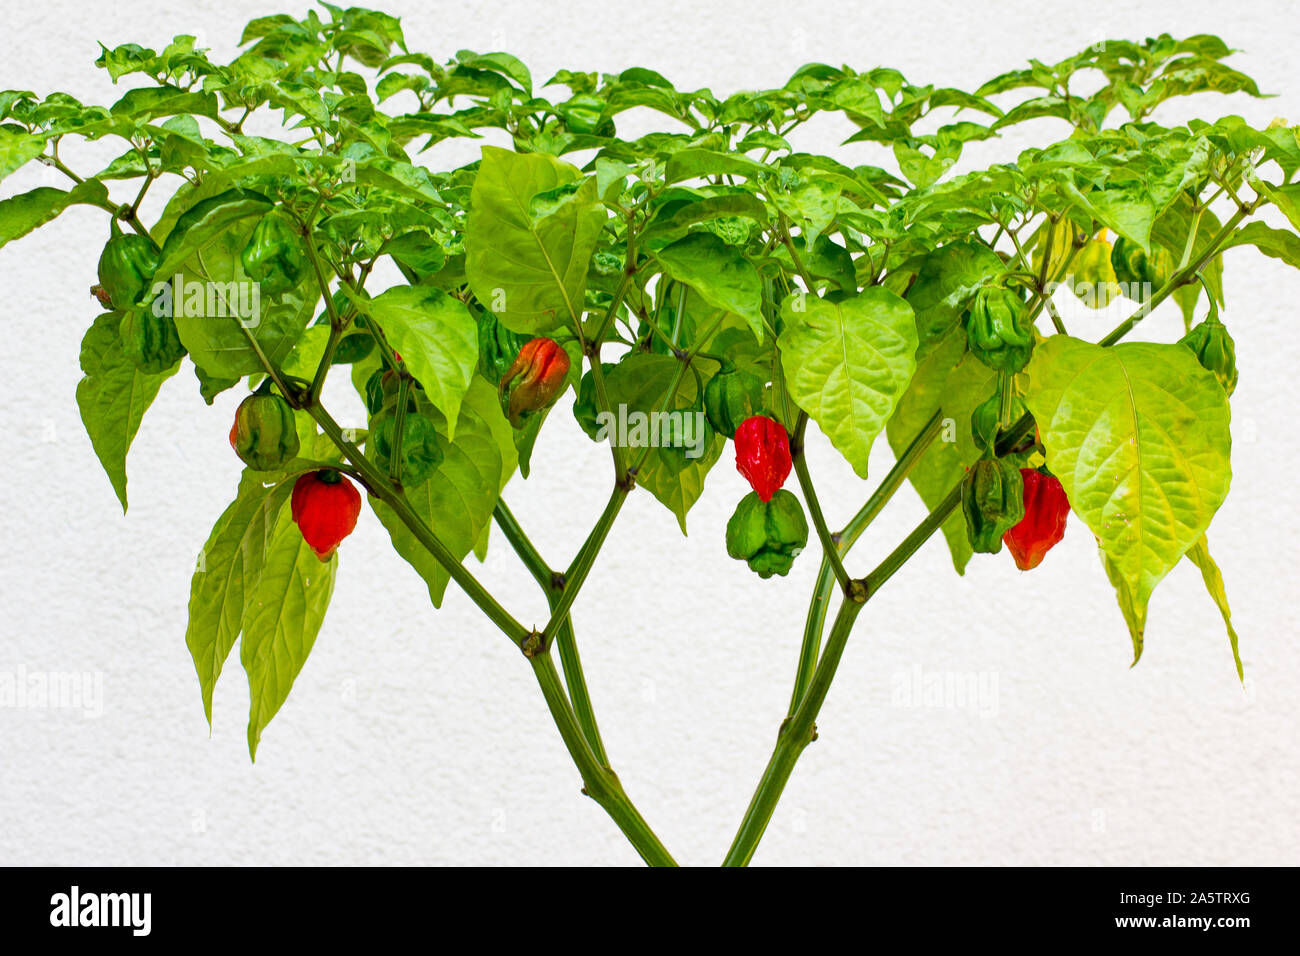 Trinidad Moruga Scorpion (Capsicum chinense) fully grown plant. With ripe and unripe peppers on the chili plant. Red, orange and green color paprika. Stock Photo